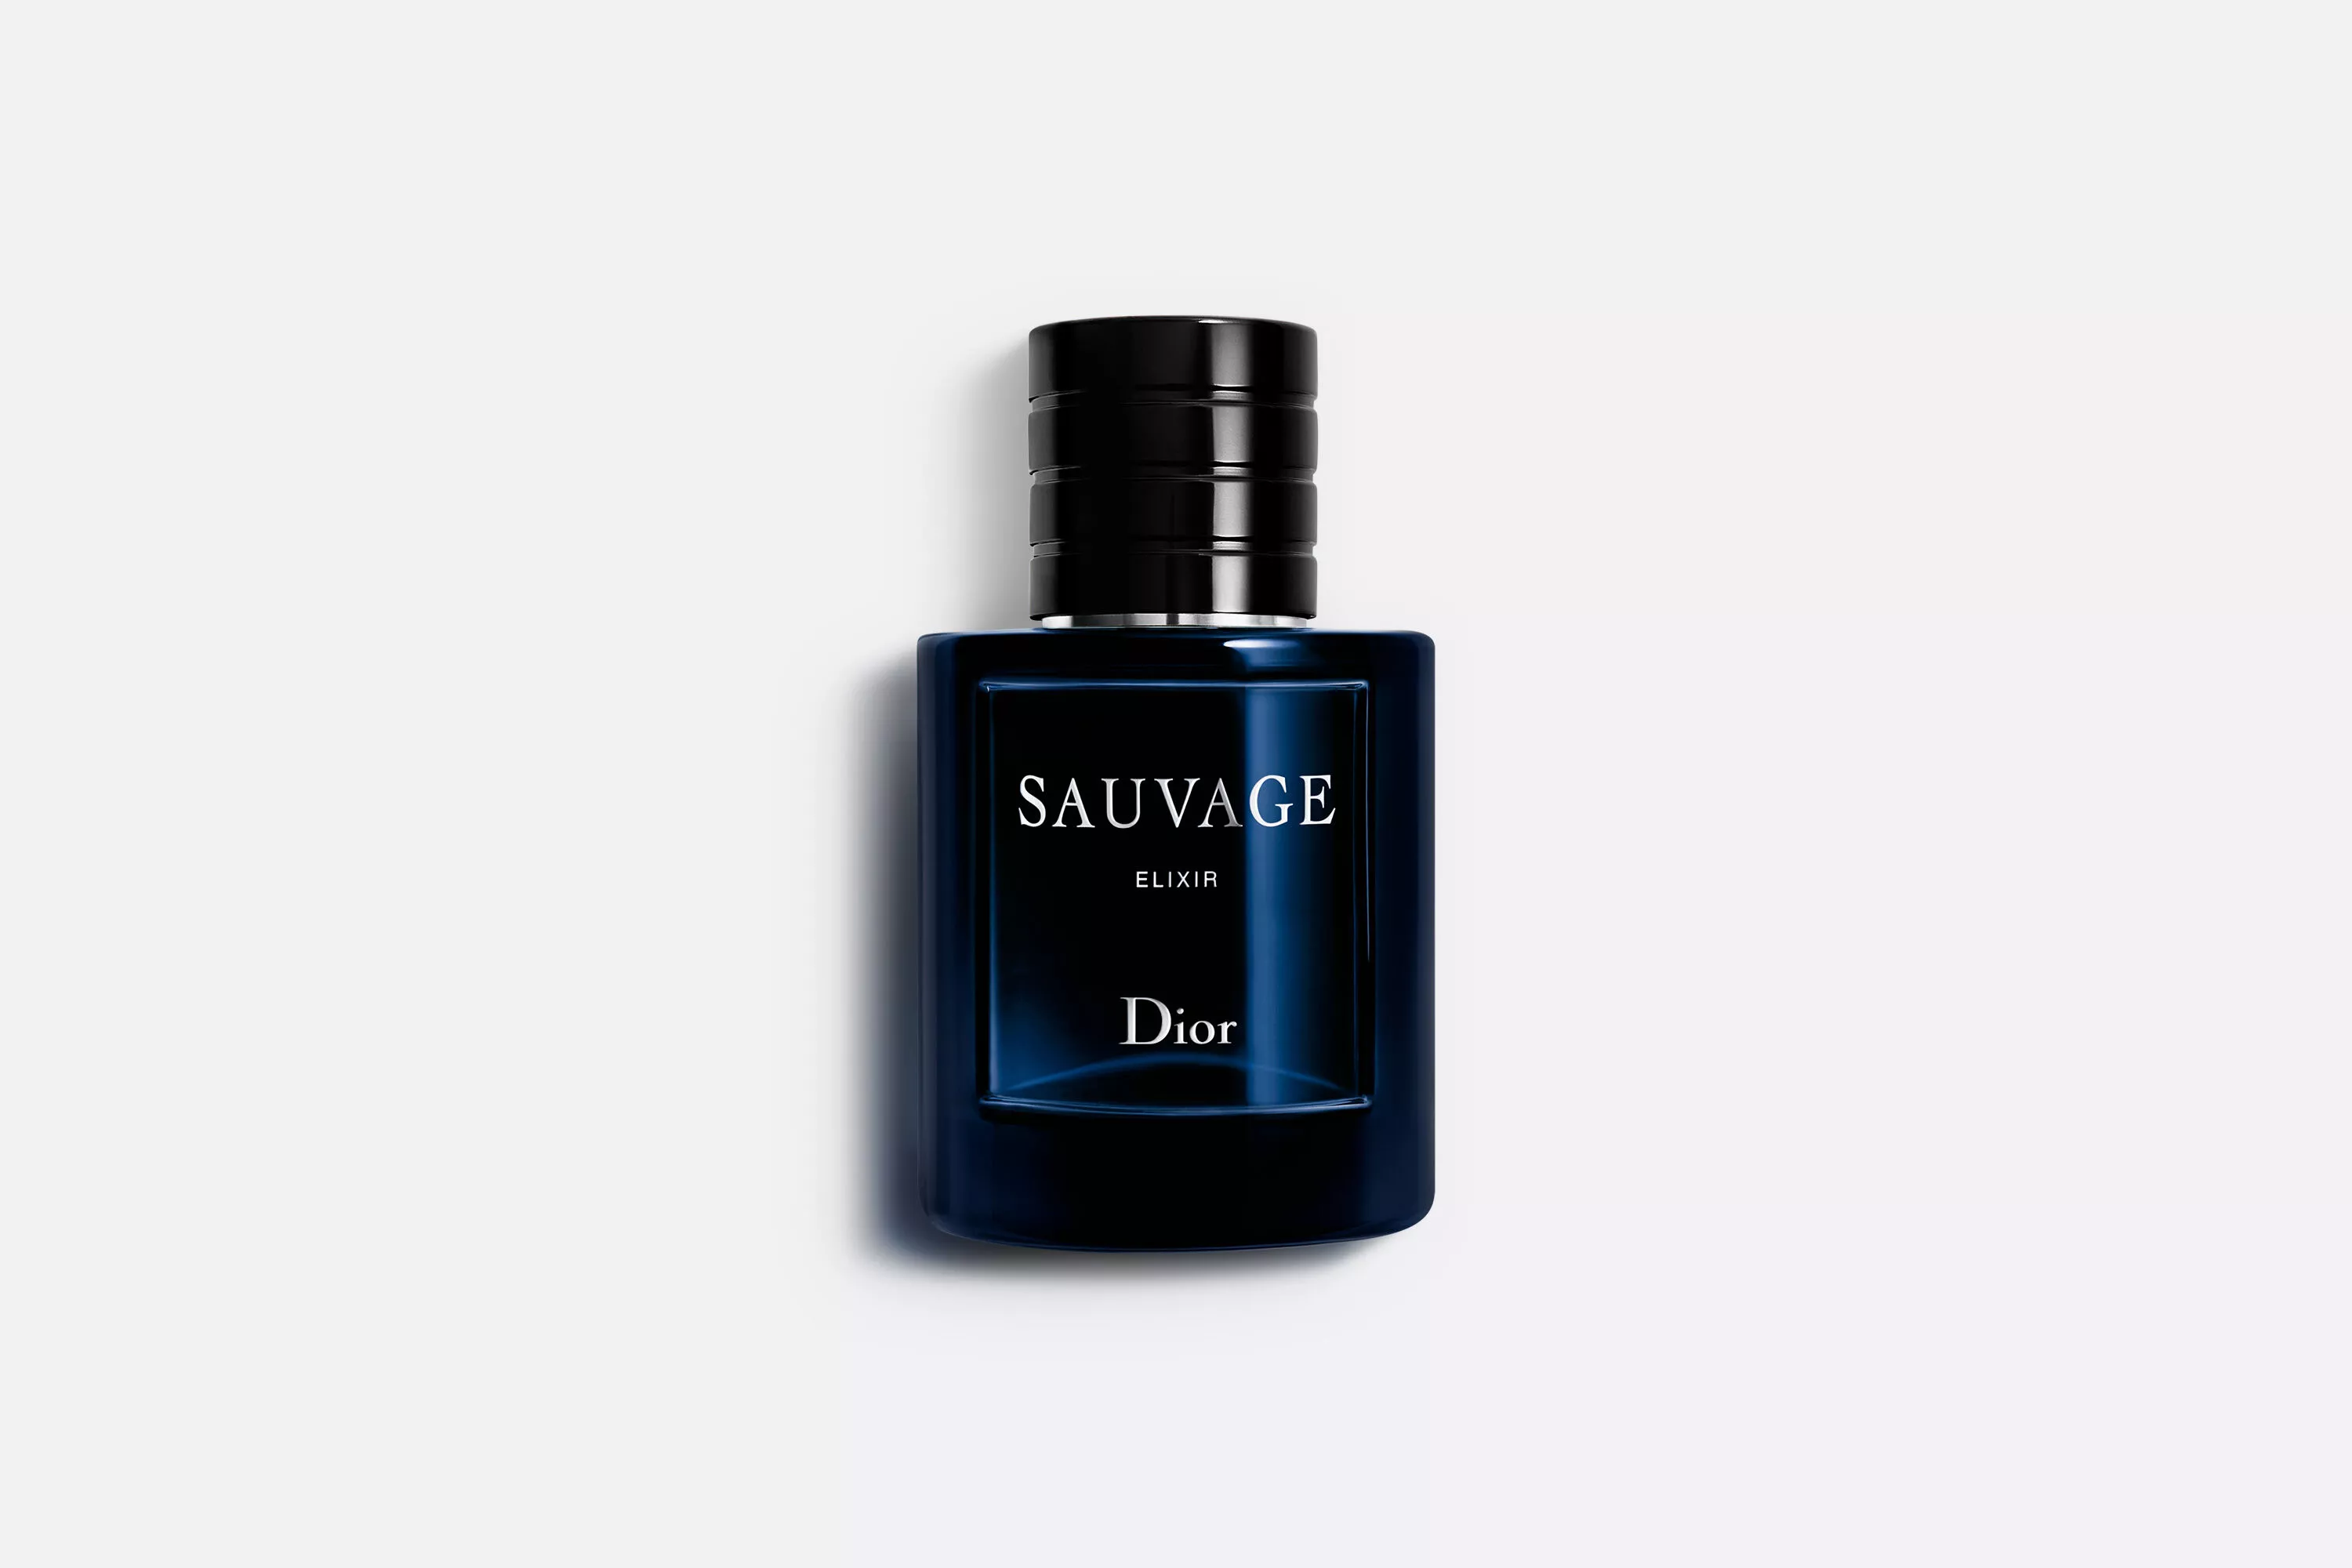 Sauvage Elixir bottle is shown in the comparison article of EDT vs EDP vs Parfum and Elixir